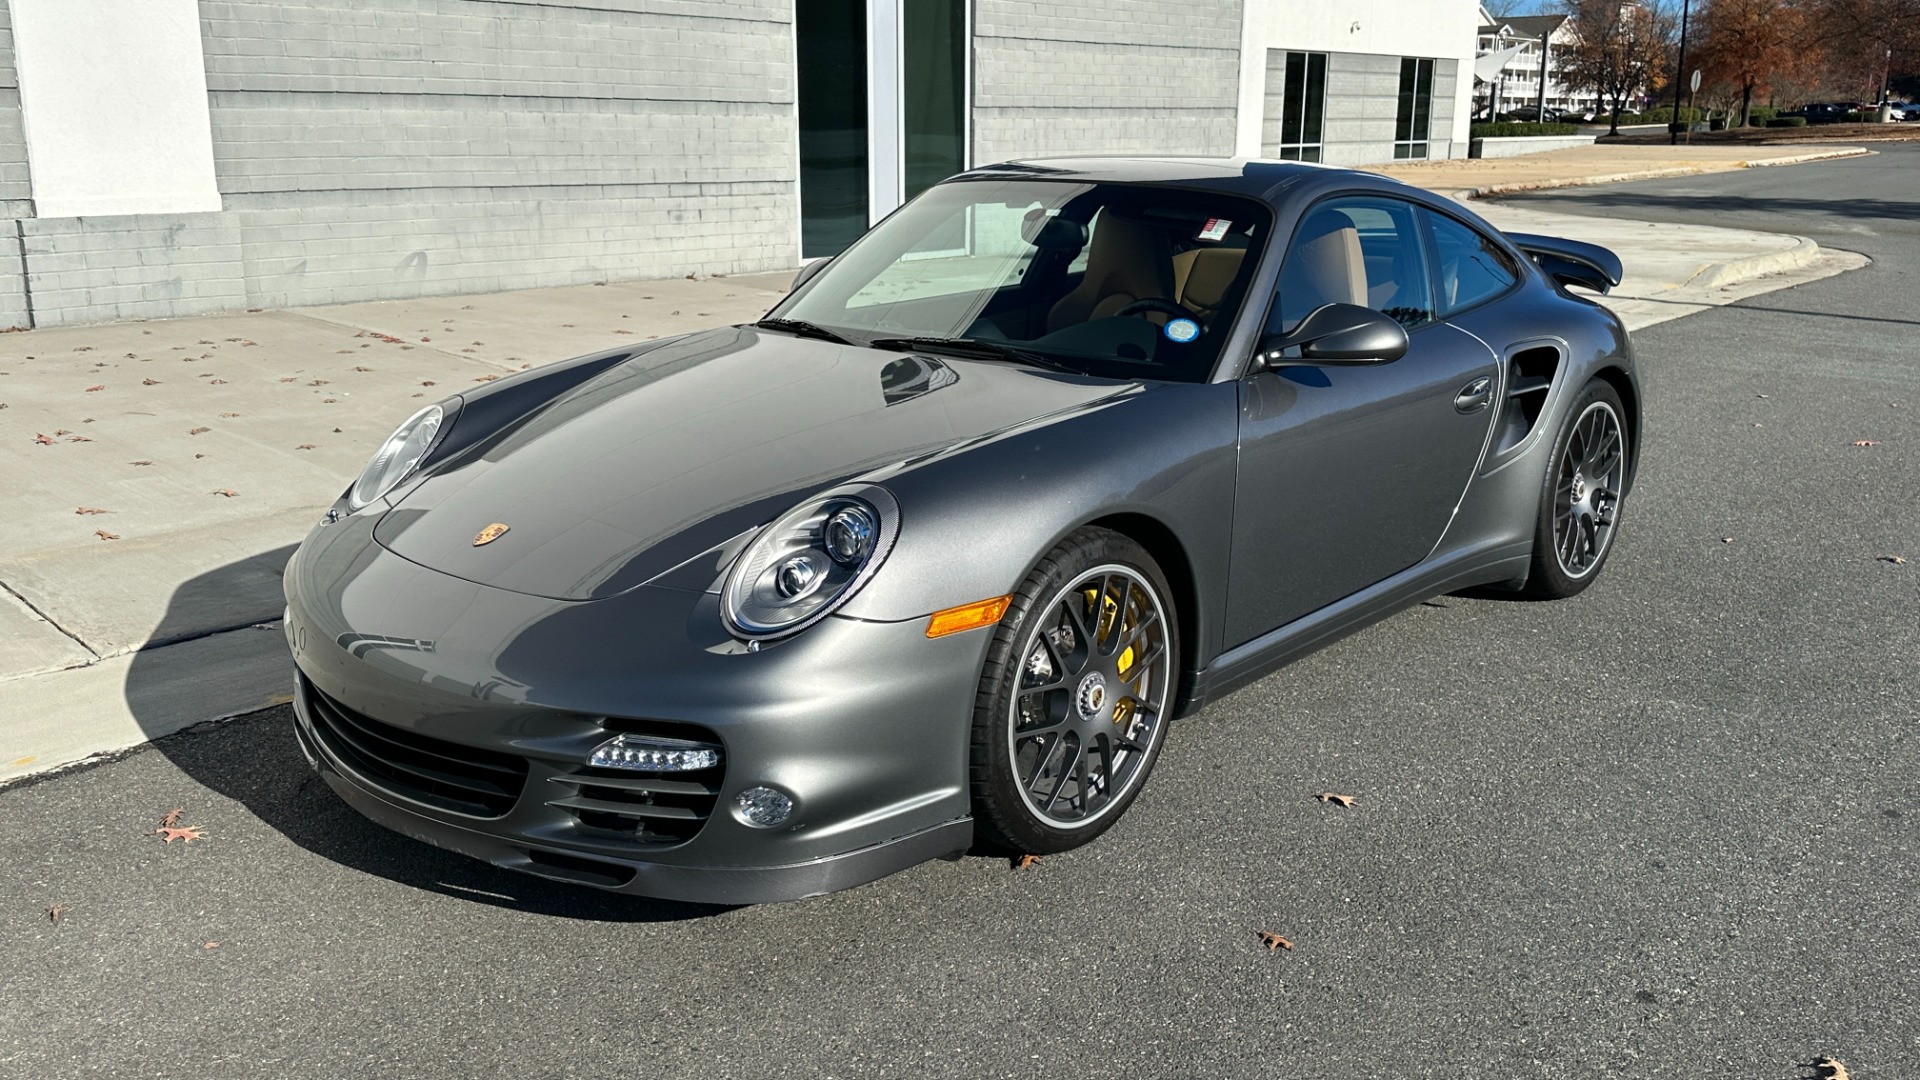 Used 2012 Porsche 911 TURBO S / CENTER LOCK WHEELS / FULL LEATHER INTERIOR / YELLOW CALIPERS / PA for sale Sold at Formula Imports in Charlotte NC 28227 2